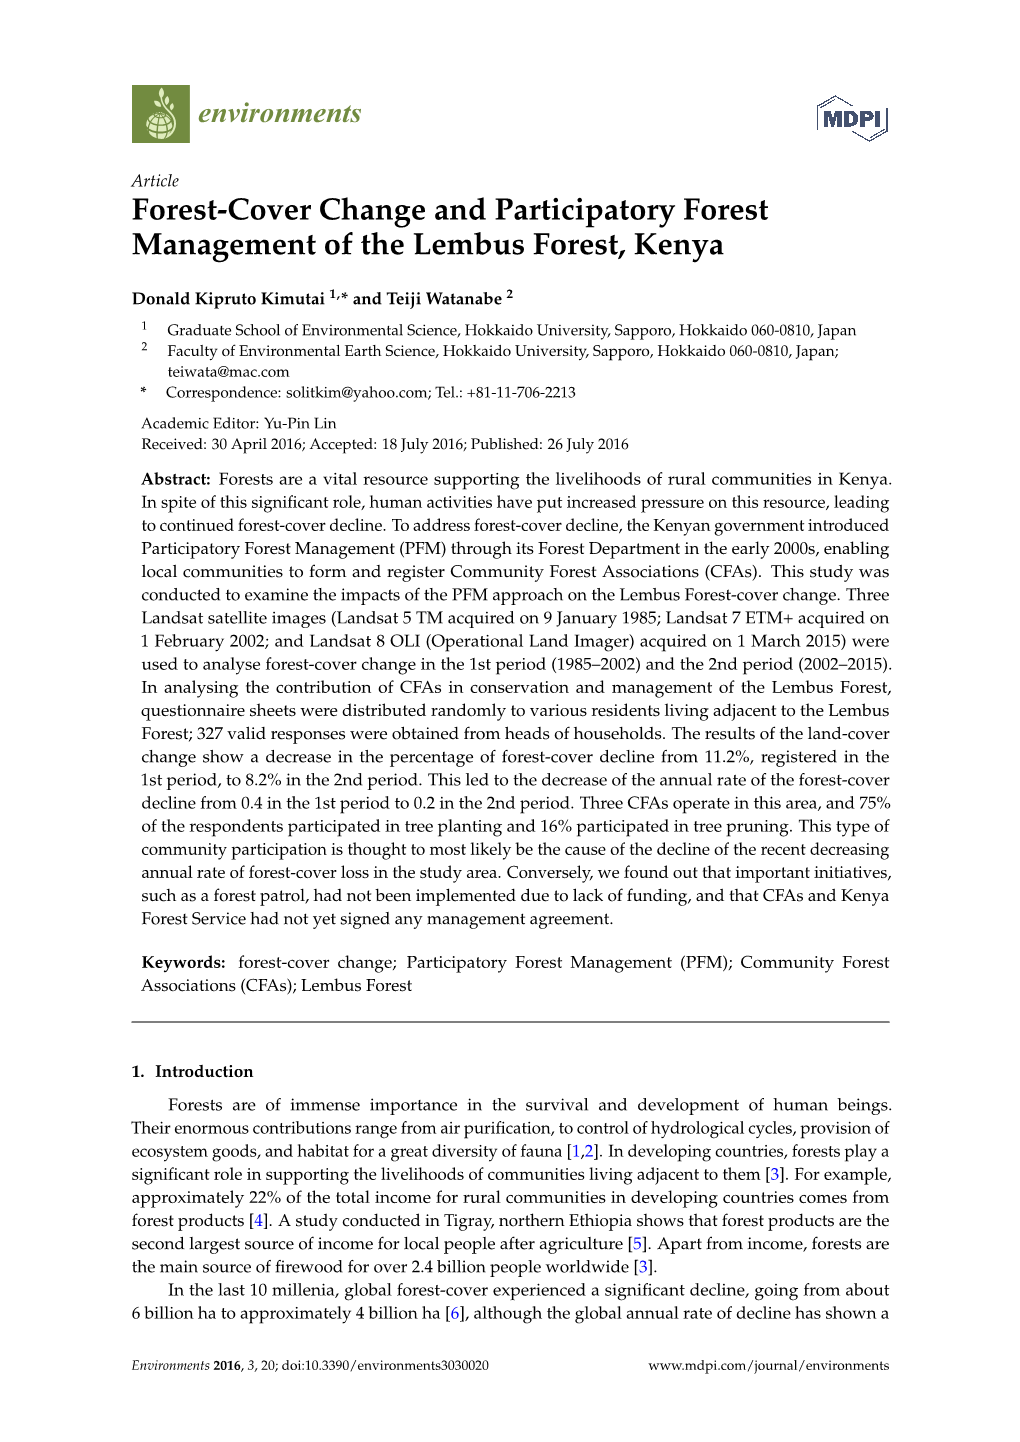 Forest-Cover Change and Participatory Forest Management of the Lembus Forest, Kenya